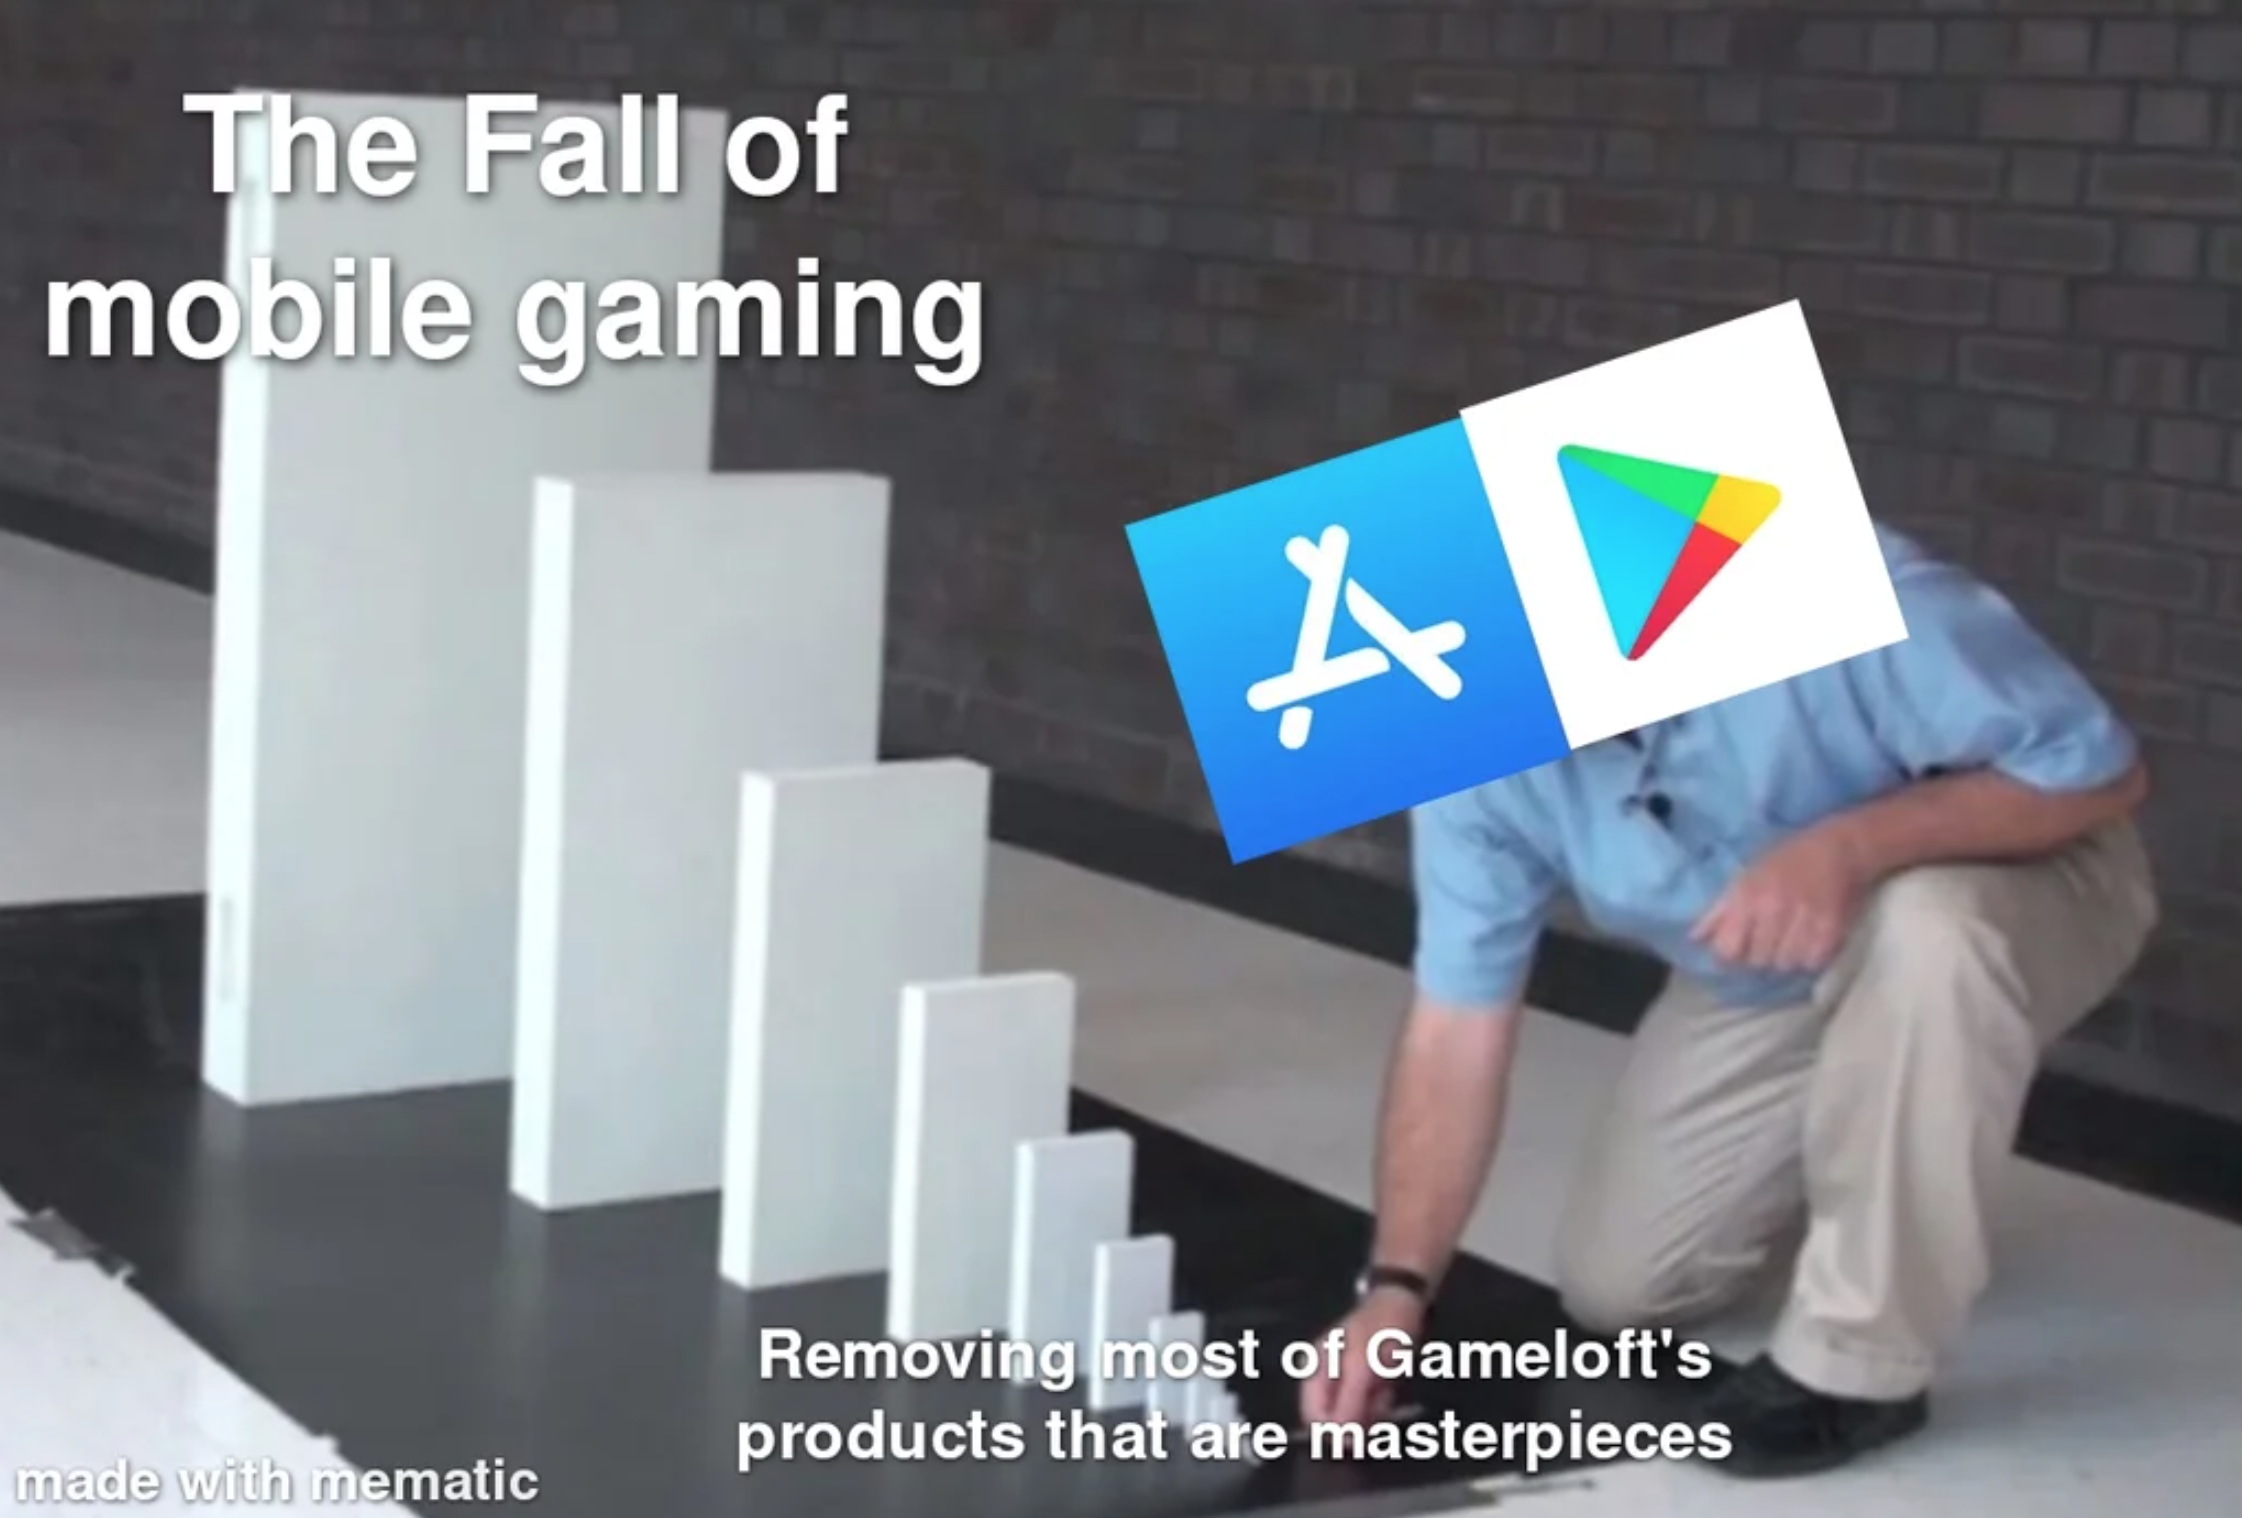 funny gaming memes - The Fall of mobile gaming A A Removing most of Gameloft's products that are masterpieces made with mematic